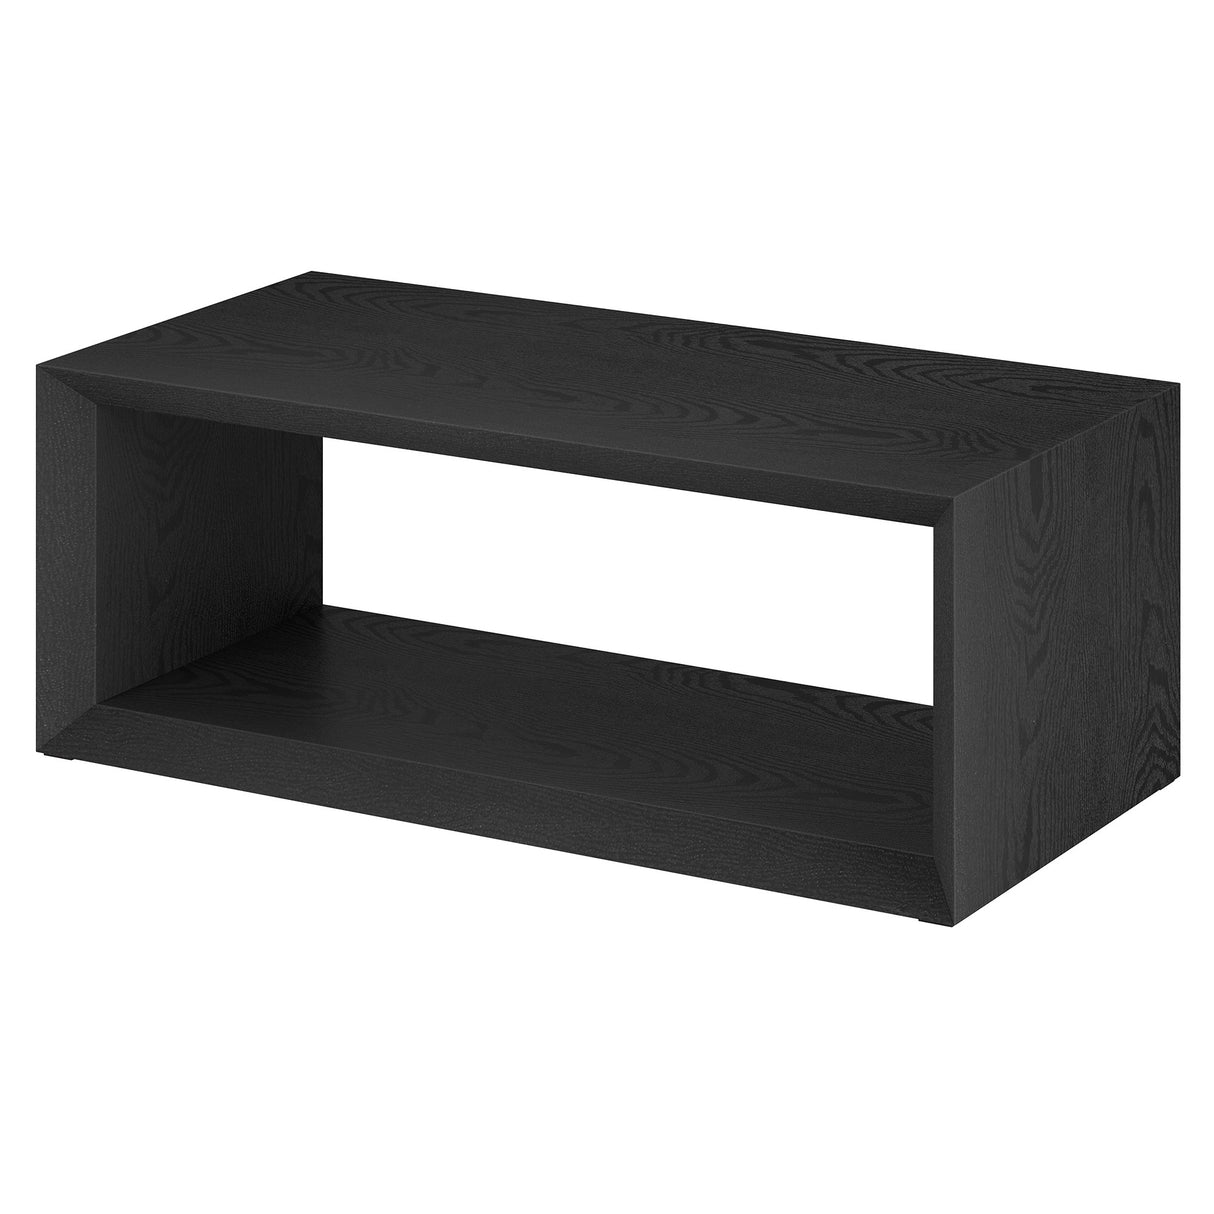 48" Black Faux Wood Coffee Table With Shelf